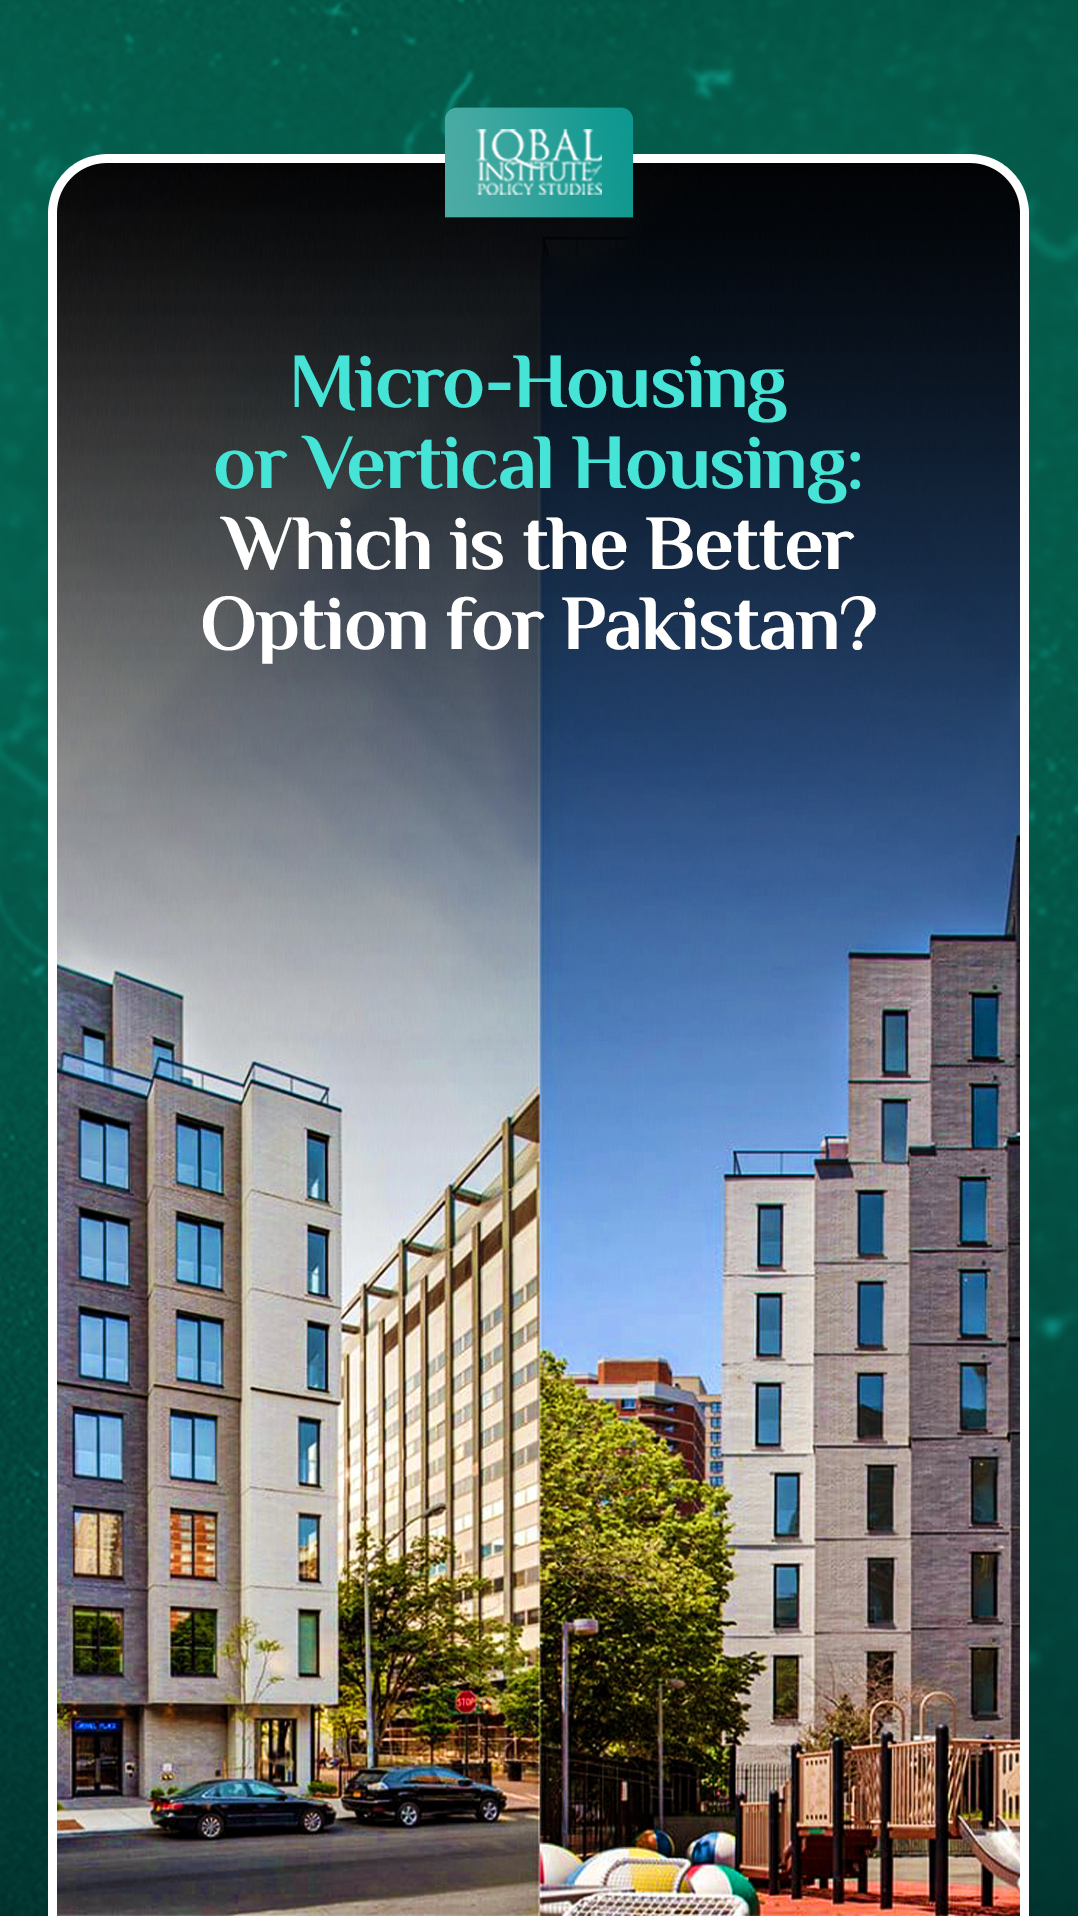 Micro-housing or Vertical Housing: Which is the better option for Pakistan?